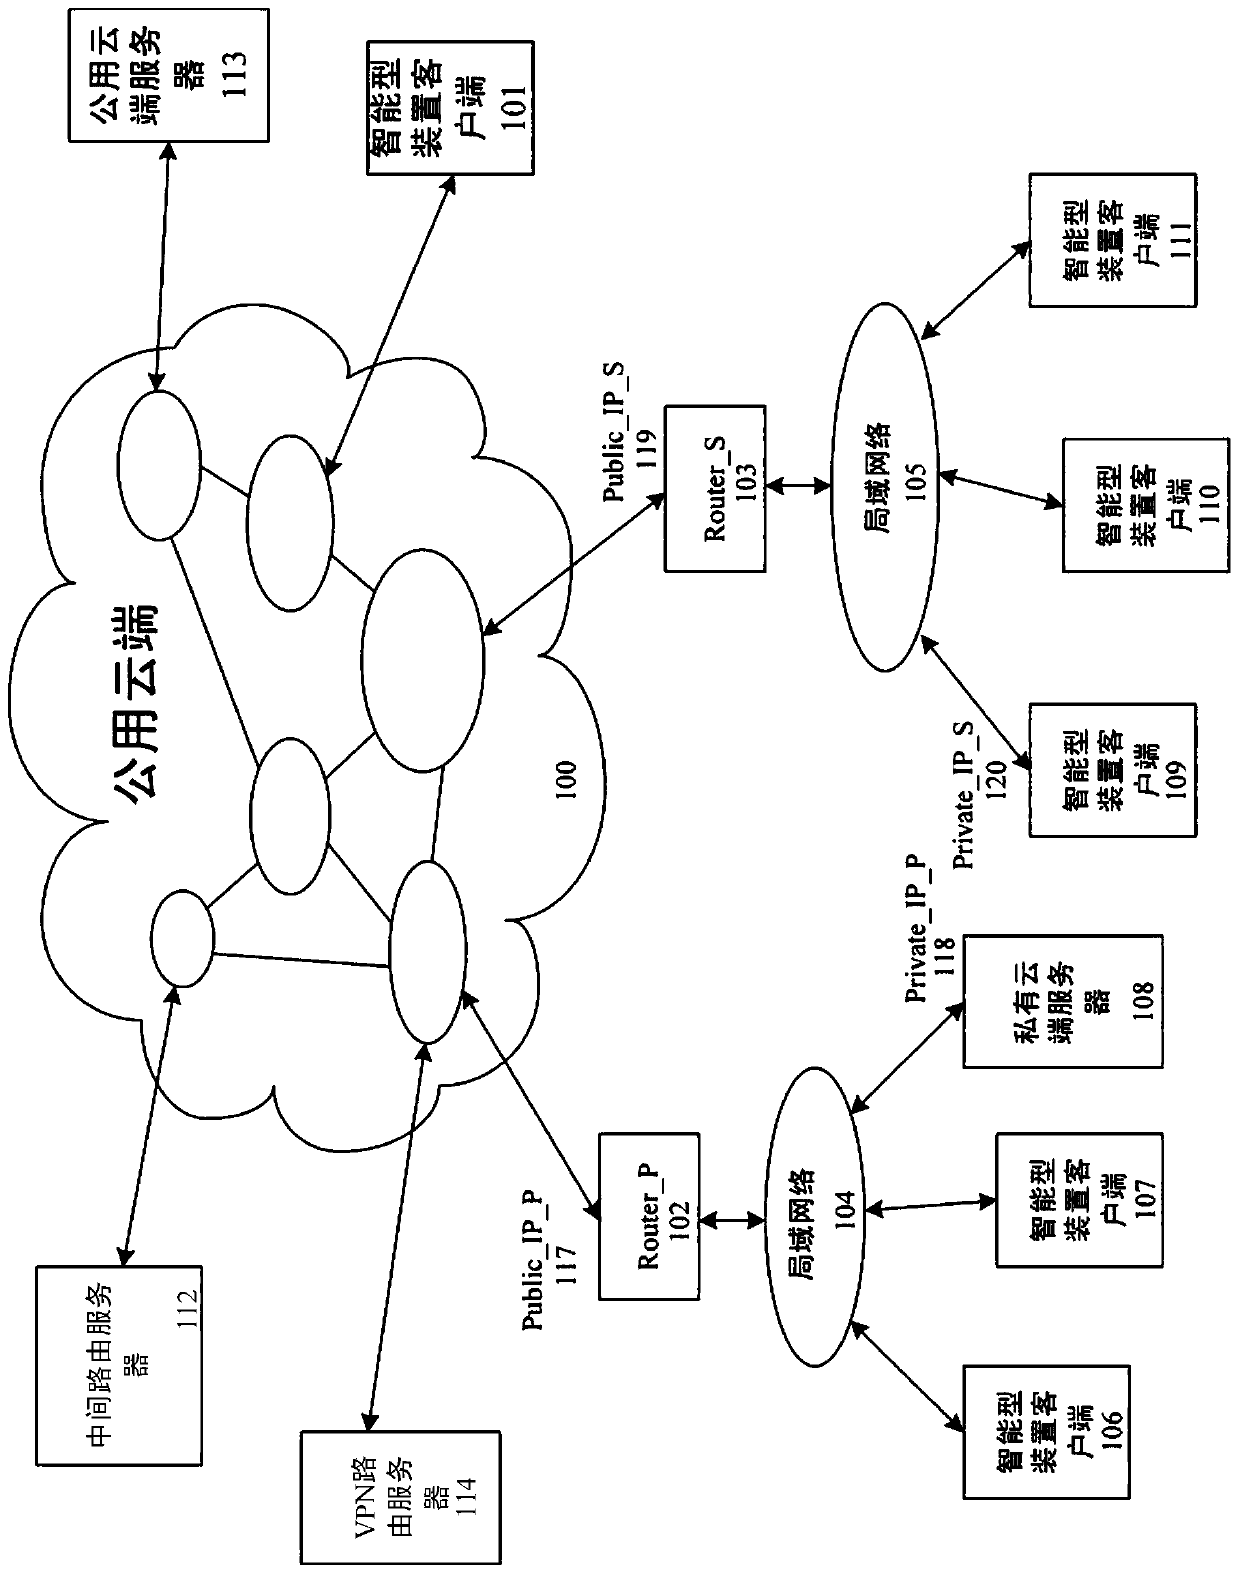 Method for Utilizing Private Routing Server, Public Network and Intelligent Device Client